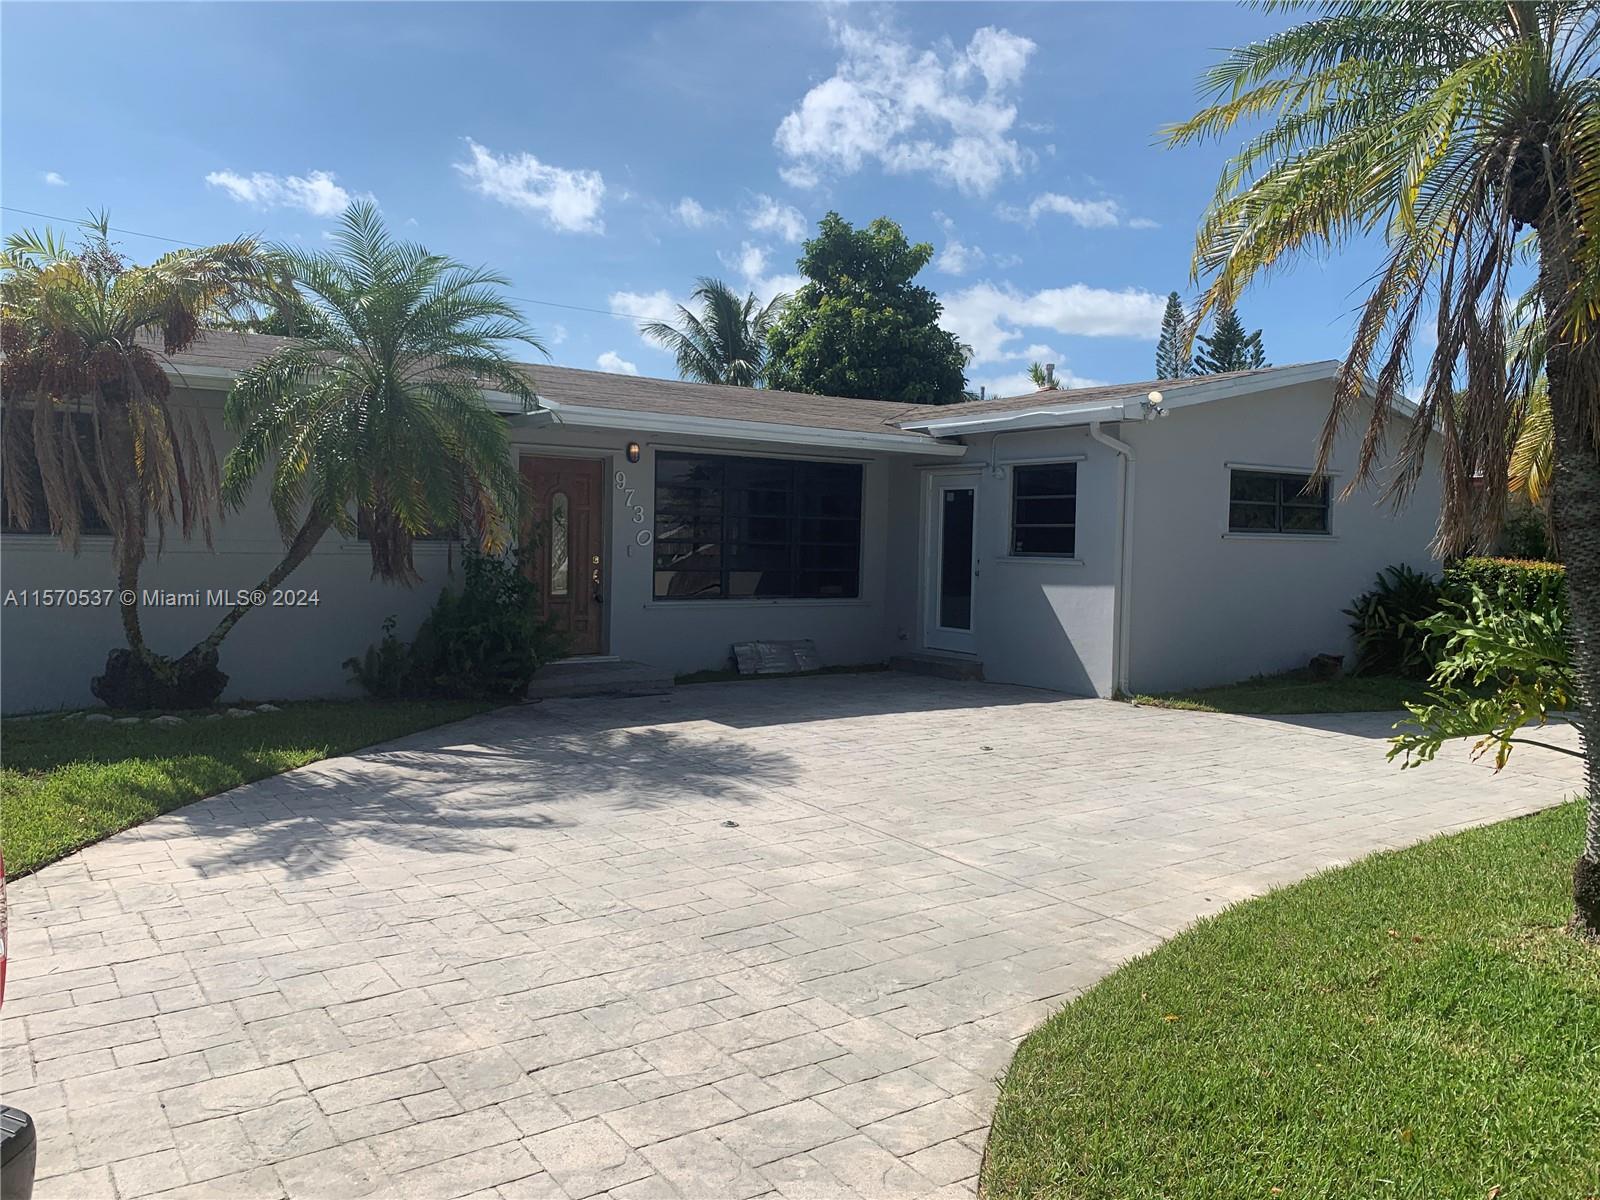 Completely Renovated Single Family home in Cutler Bay. 3 Bedroom, 2 baths, Plus a Den that can be a 4th bedroom. Nice, fenced backyard. Covered Terrace. Washer/Dryer. Swimming pool. Granite countertops. Stainless Steel appliances. All tile floors. Plenty of parking.